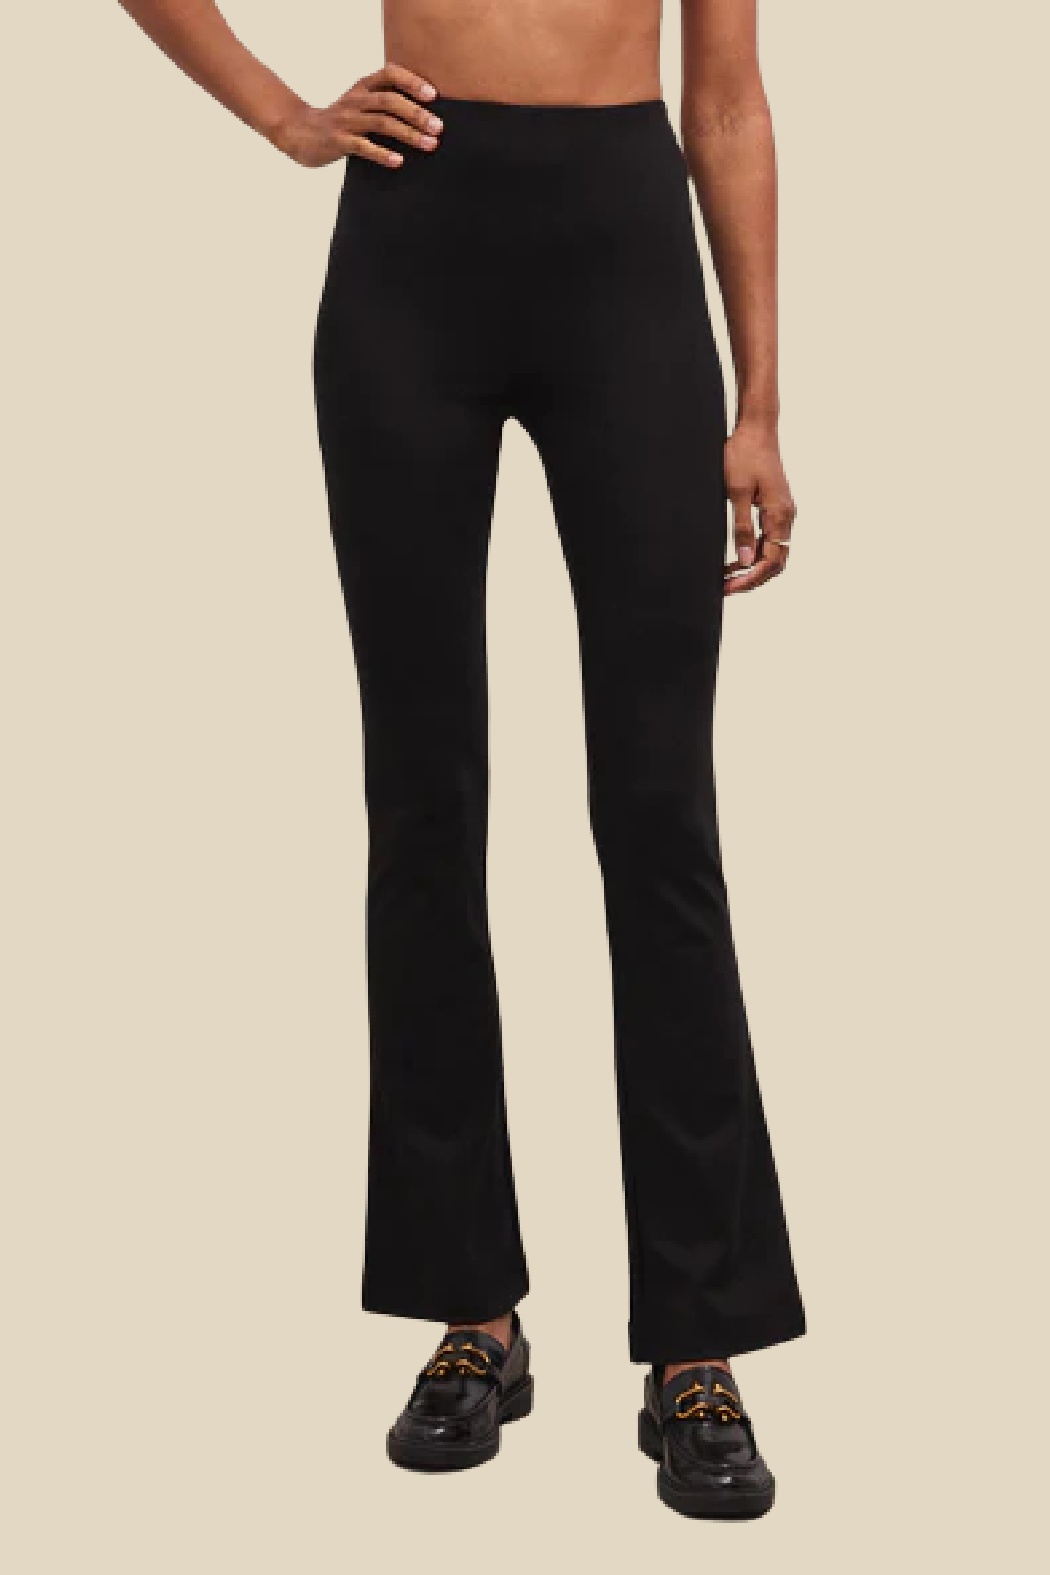 The Perfect Pant Hi-Rise Flare - Classic Black - Monkee's of